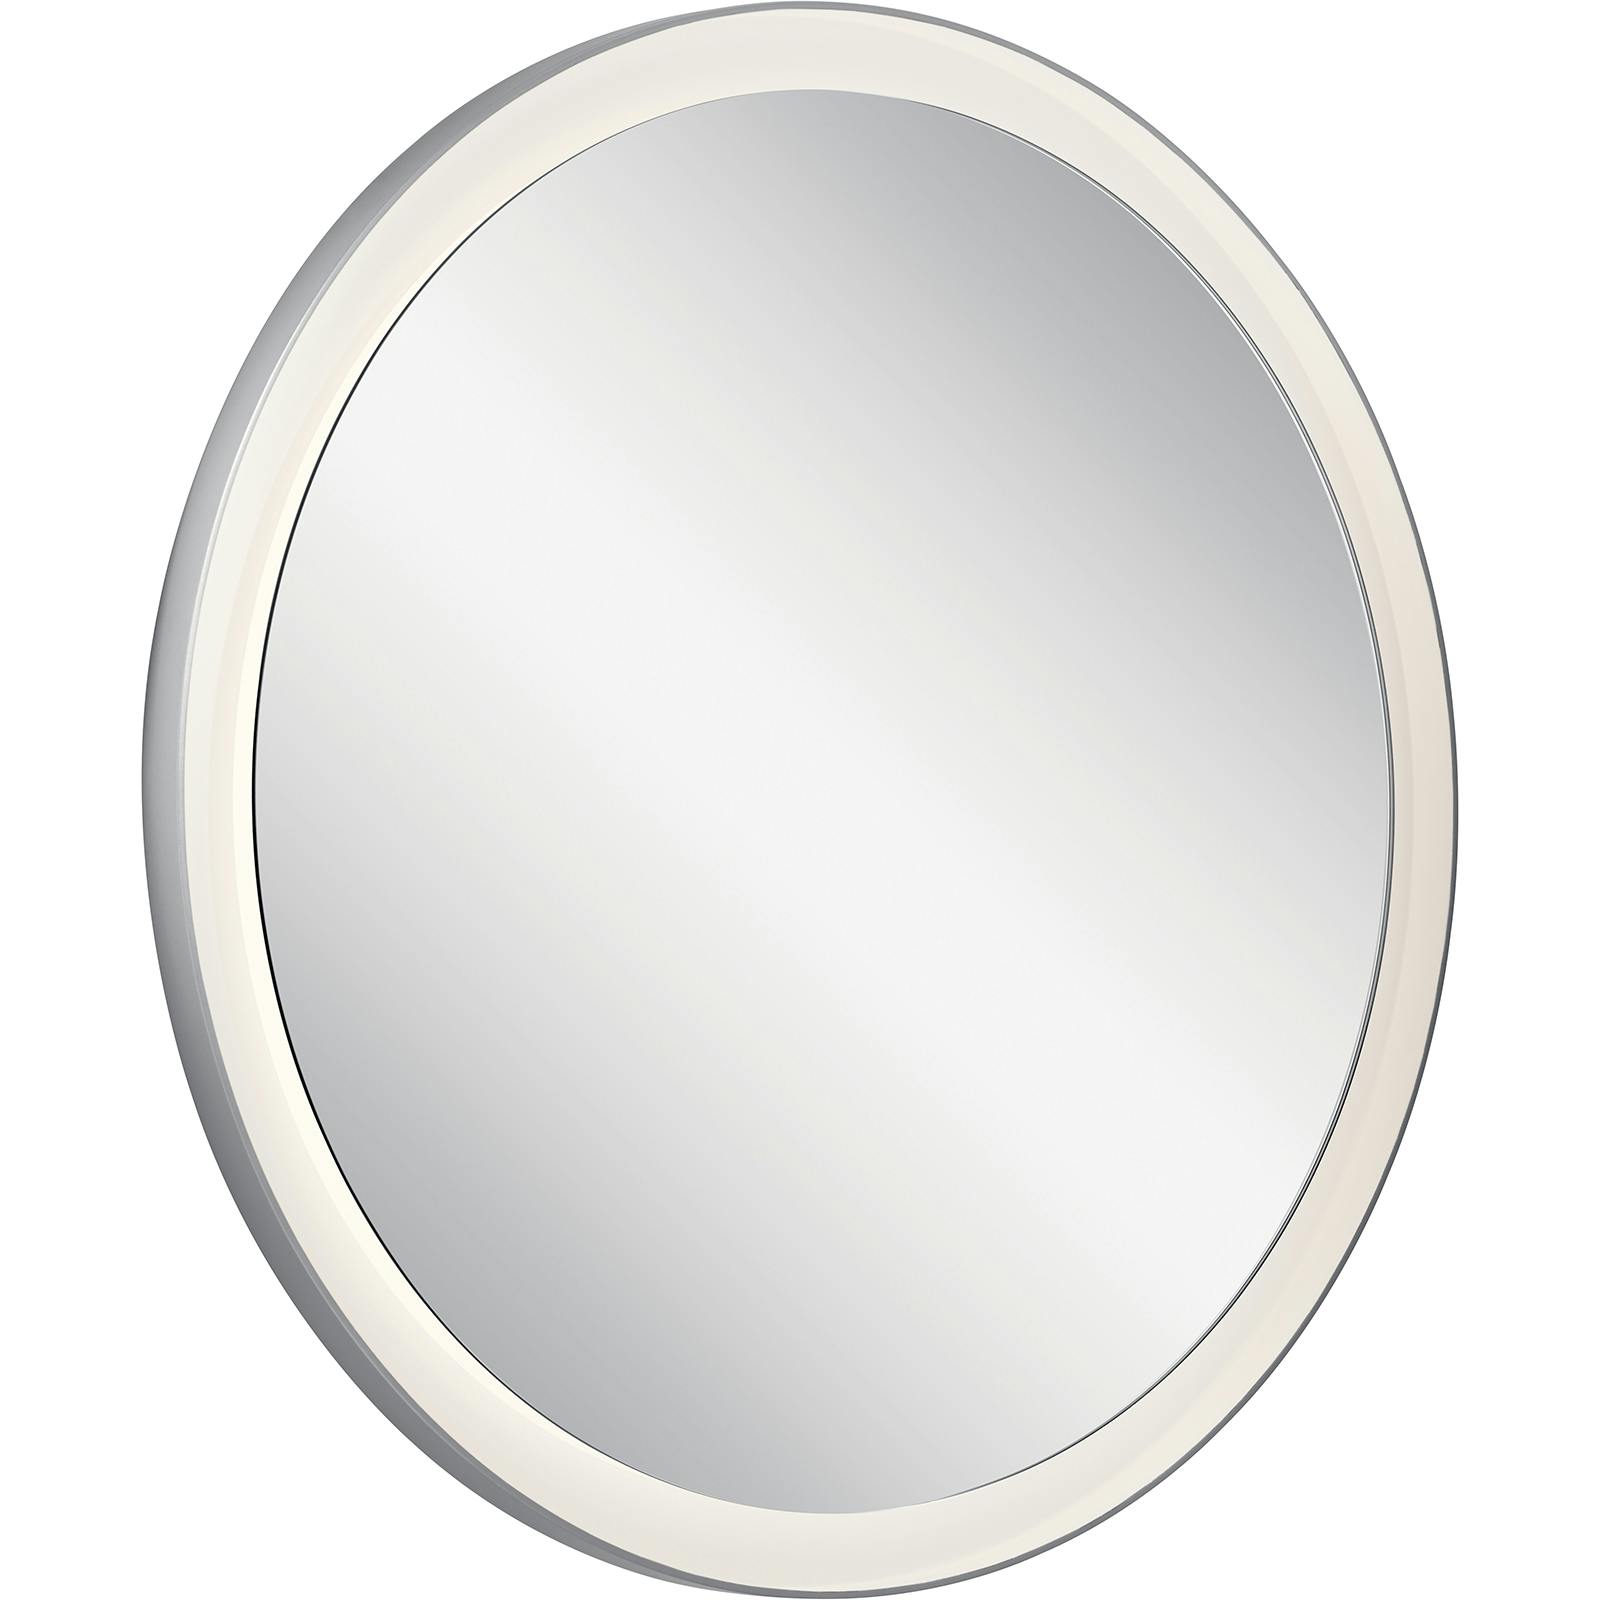 Ryame™ Round Lighted Mirror Silver on a white background